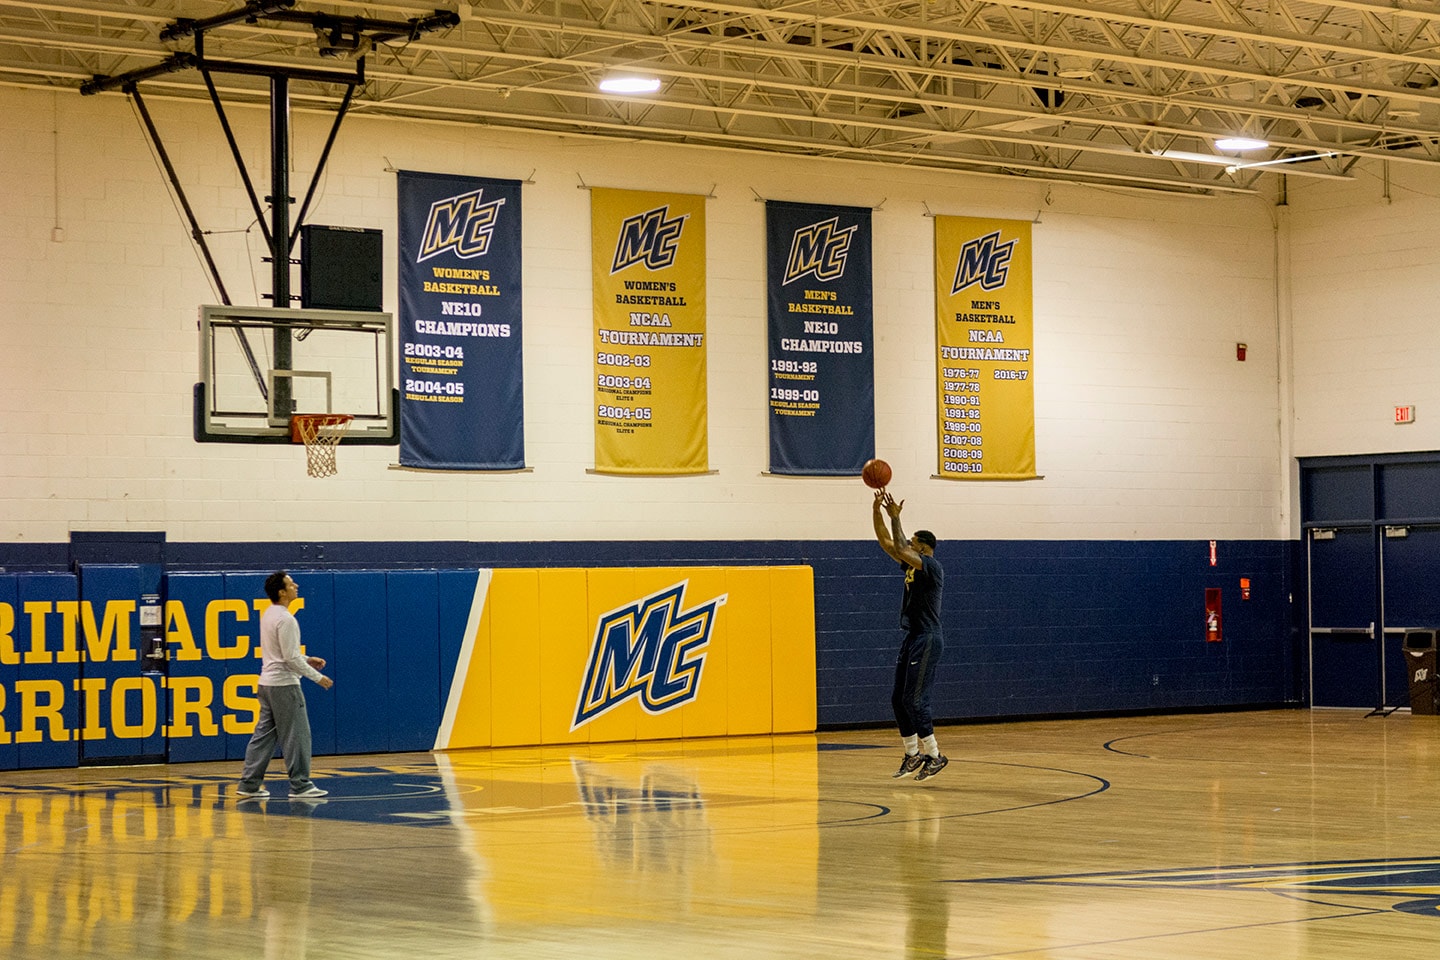 Merrimack College Vinyl Pad Wrap and Championship Banners